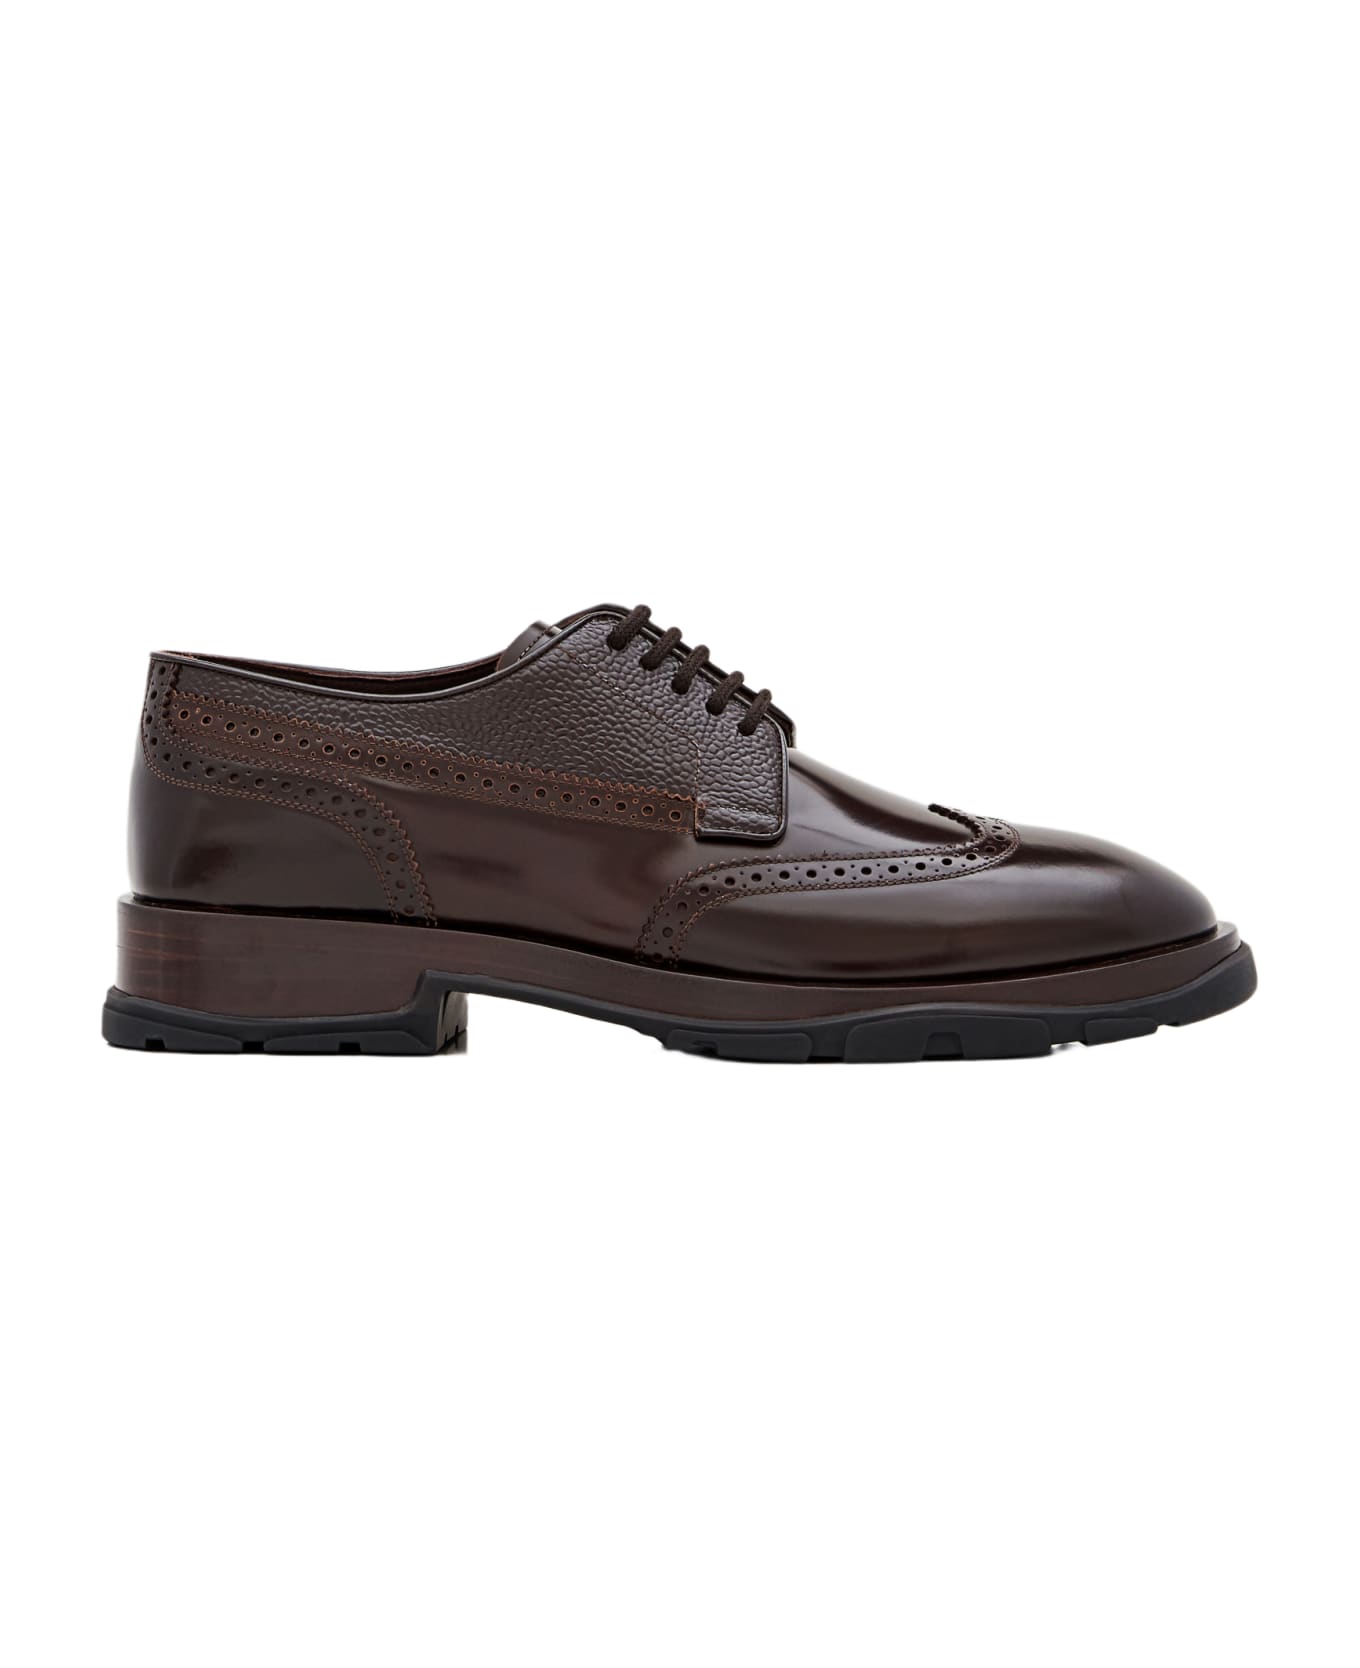 Alexander McQueen Derby Leather Shoes - Brown ローファー＆デッキシューズ